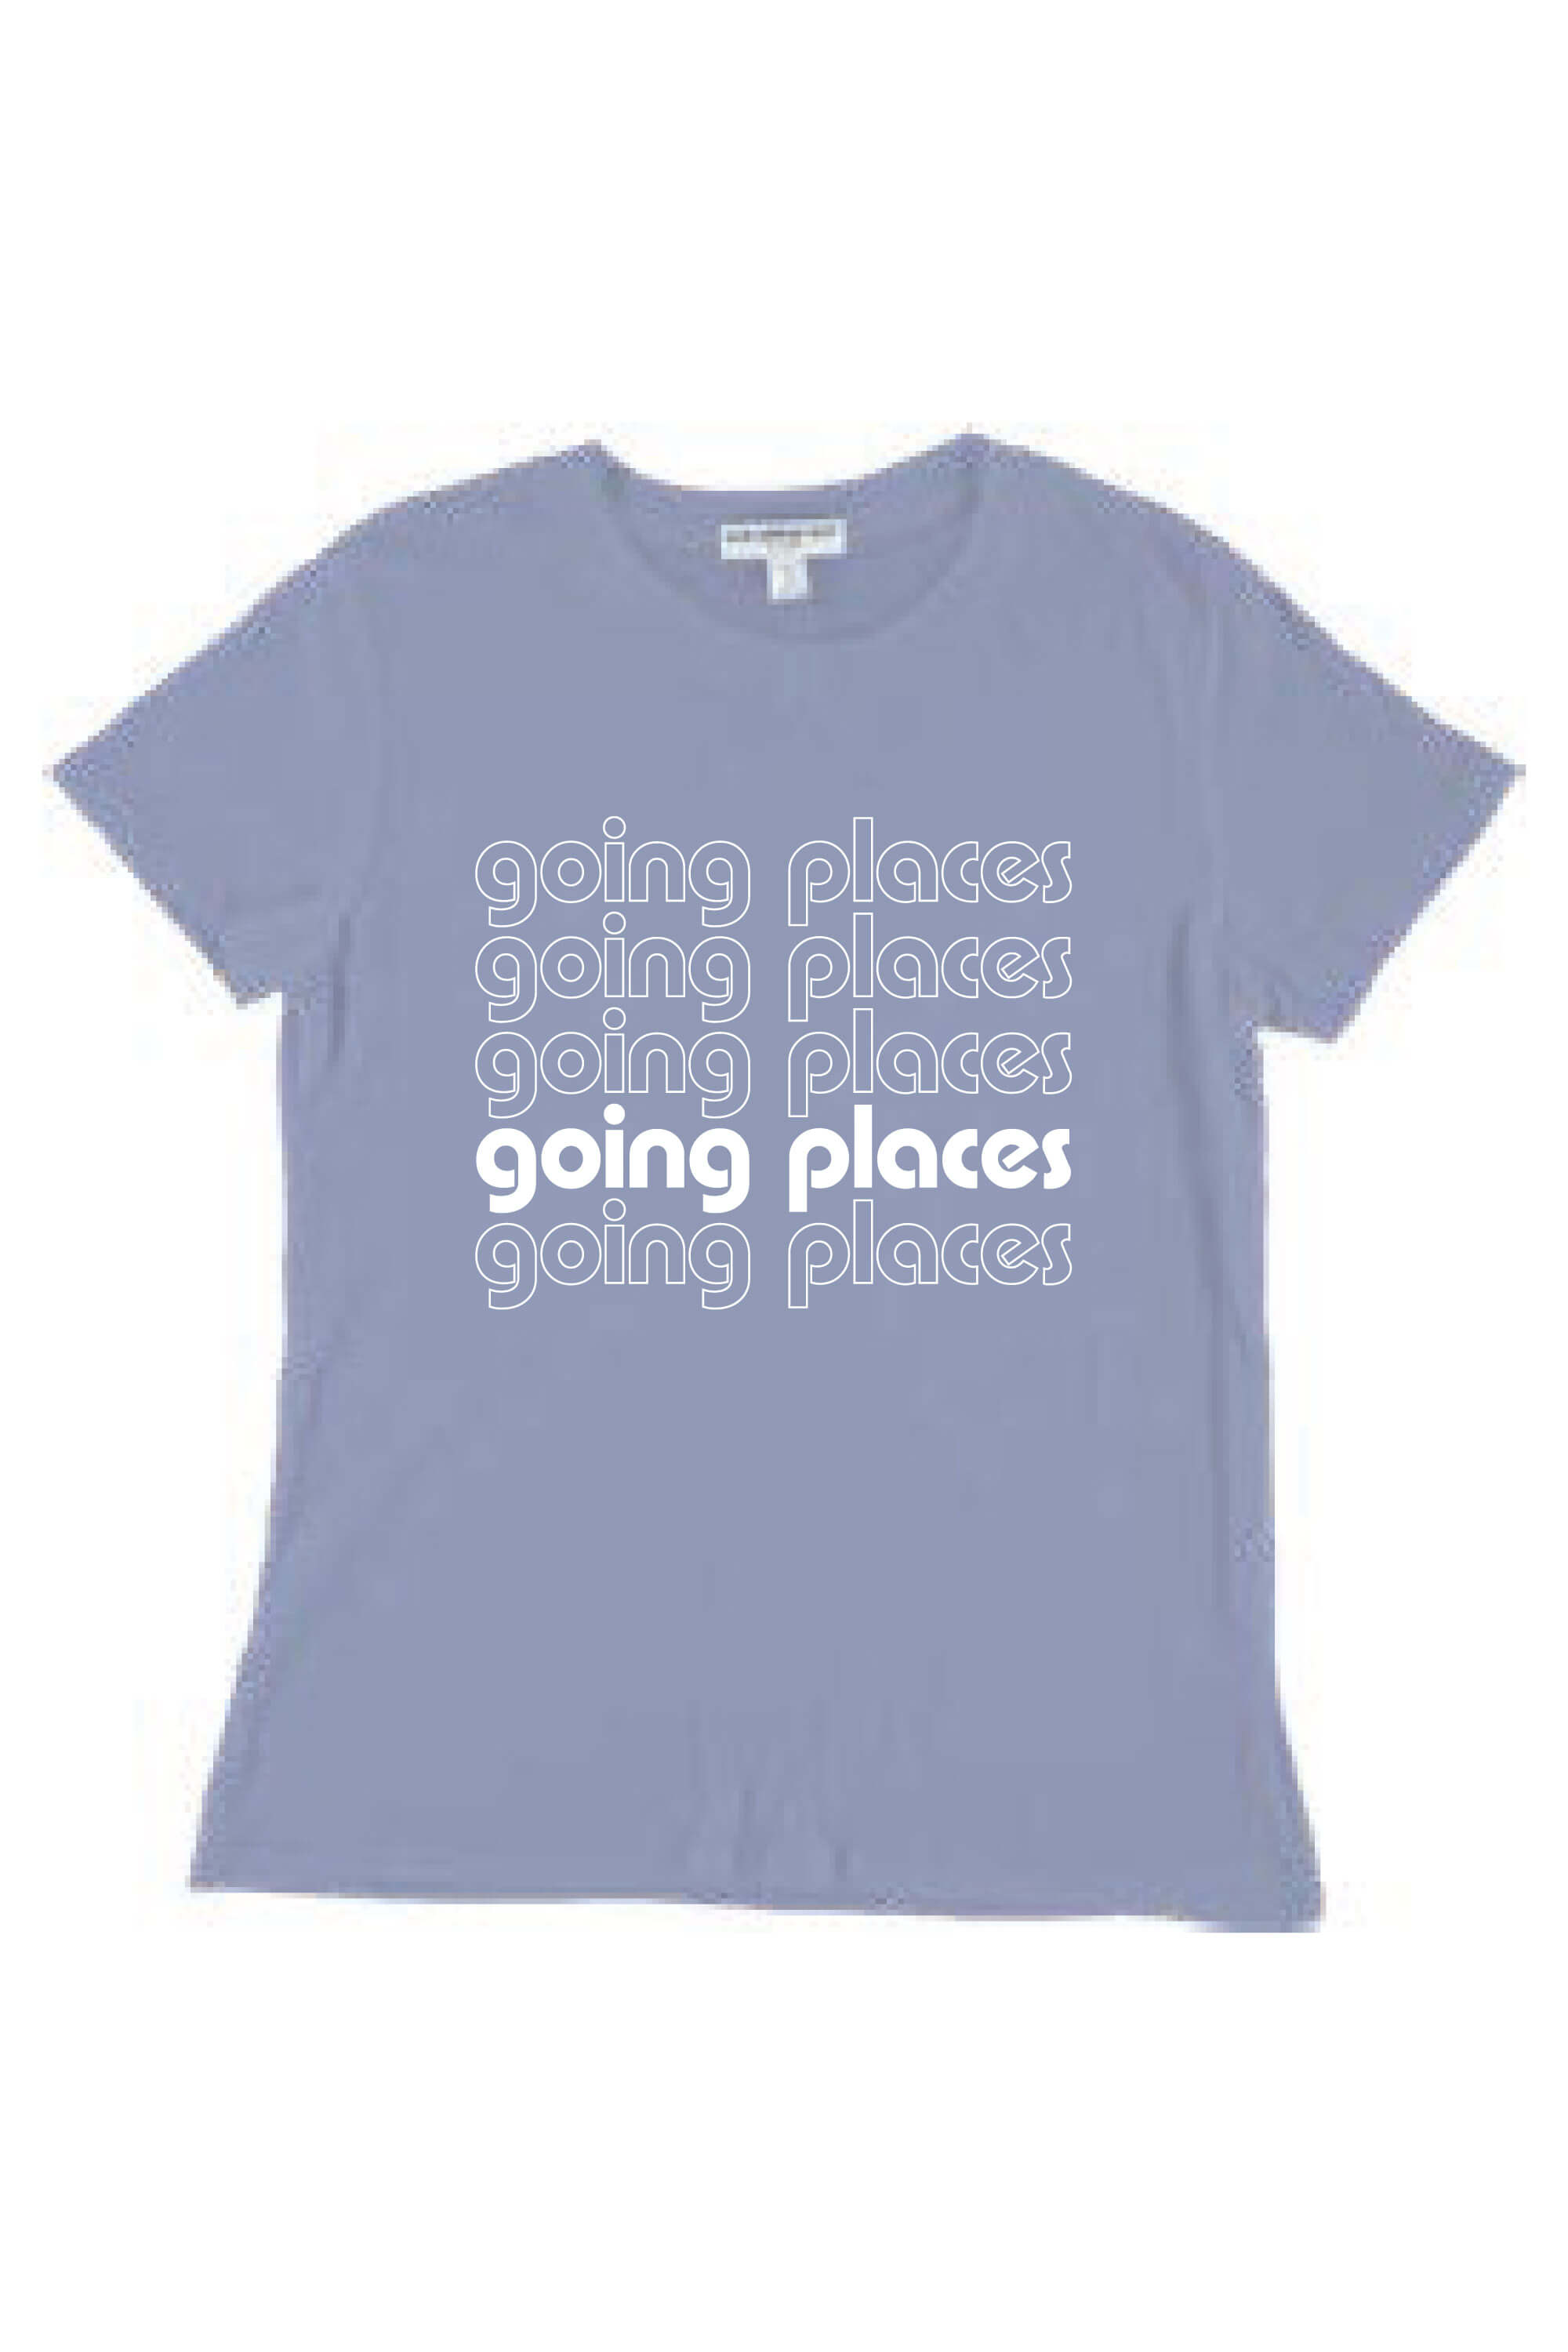 GOING PLACES YOUTH SIZE LOOSE TEE